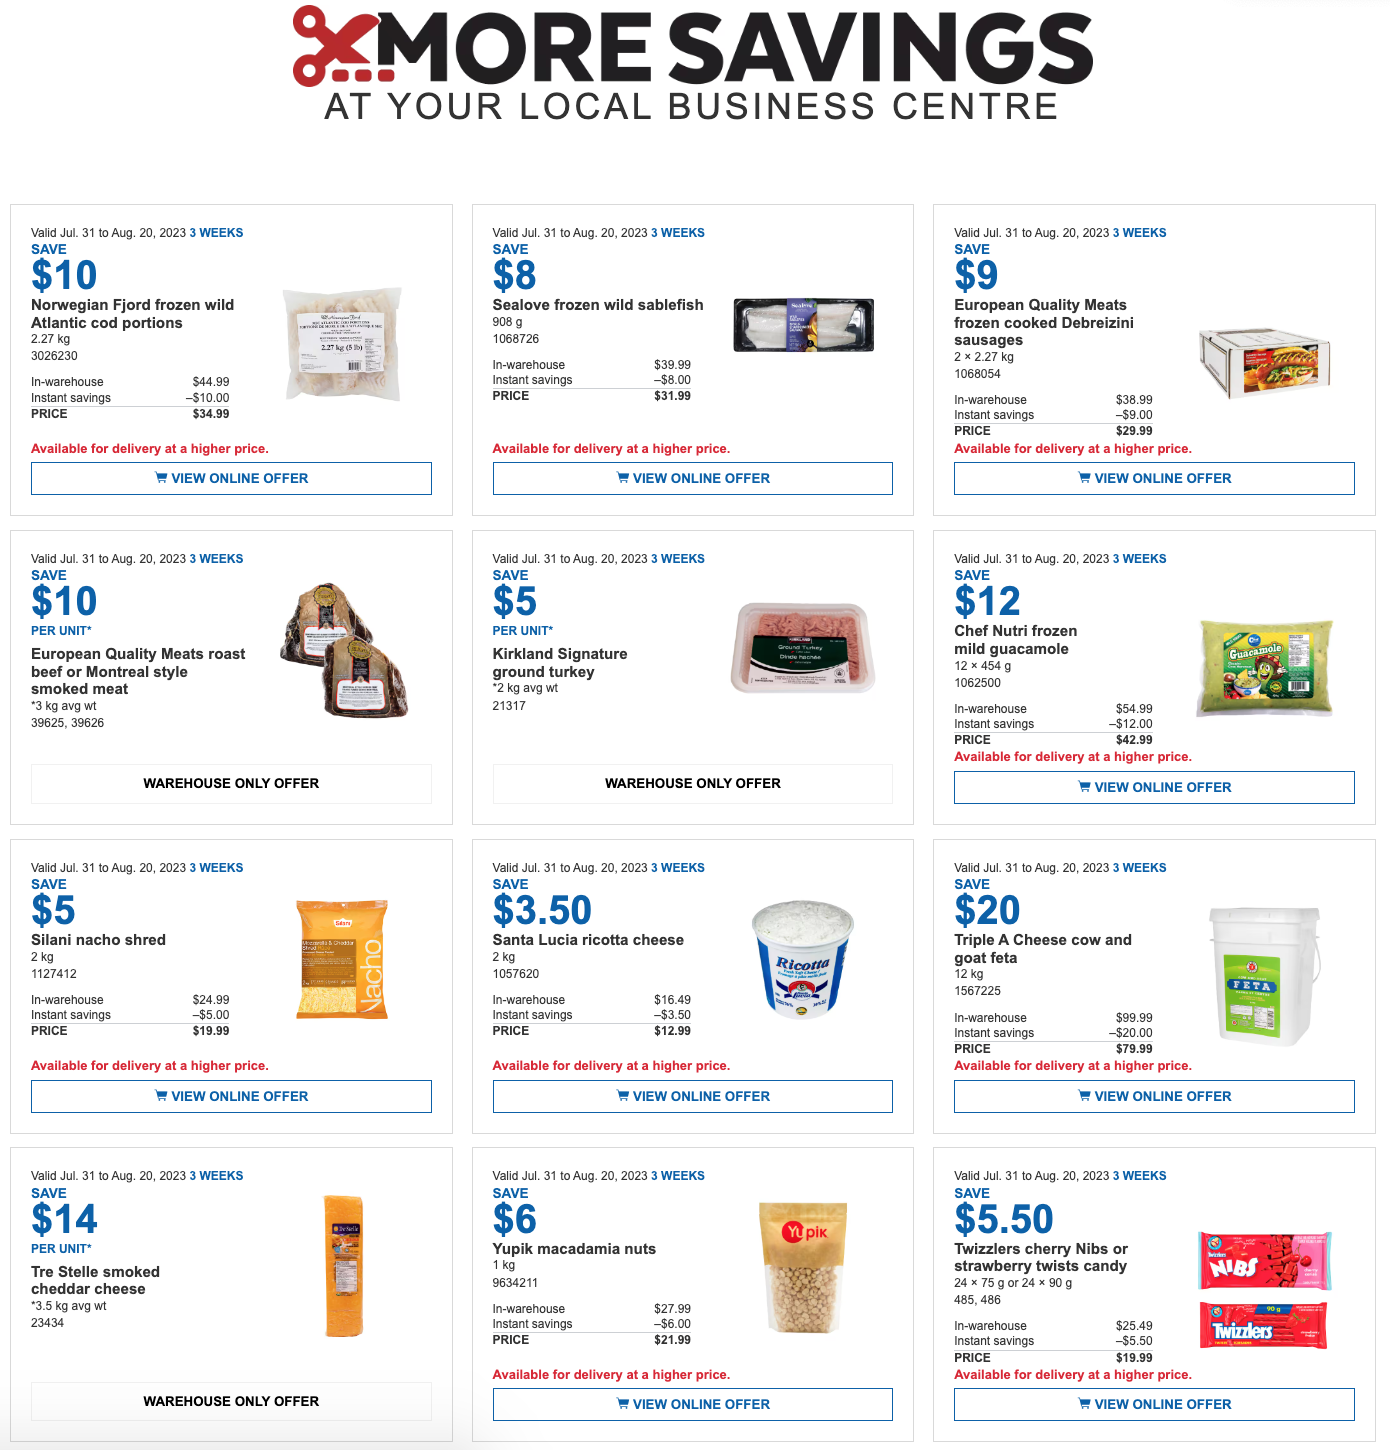 Costco Canada Business Centre Instant Savings Coupons / Flyer, until